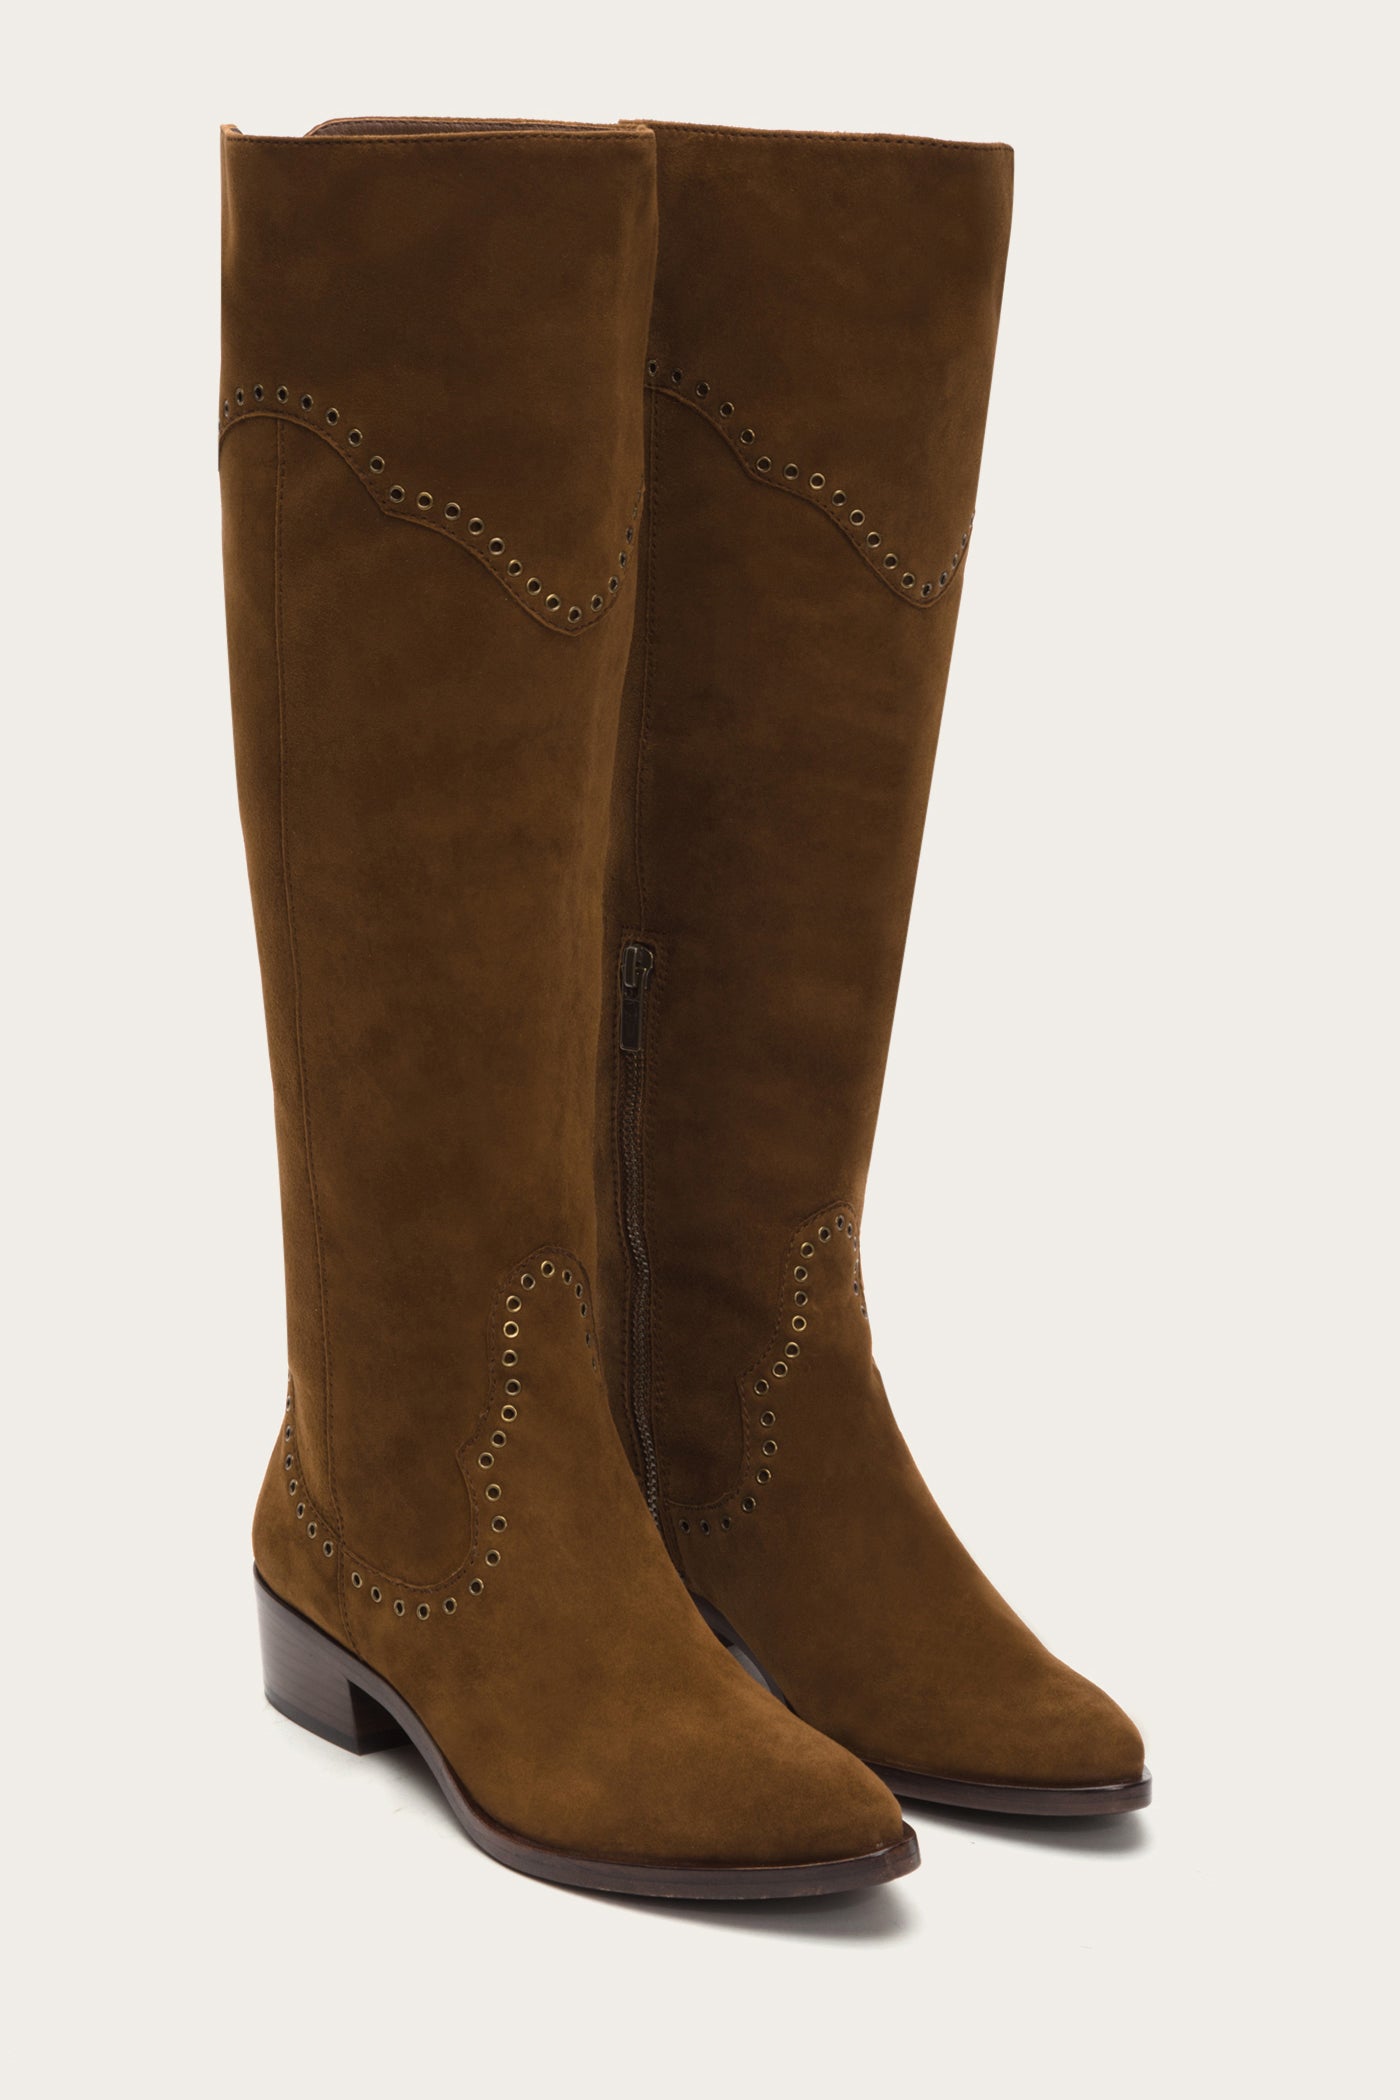 frye ray grommet over the knee boots